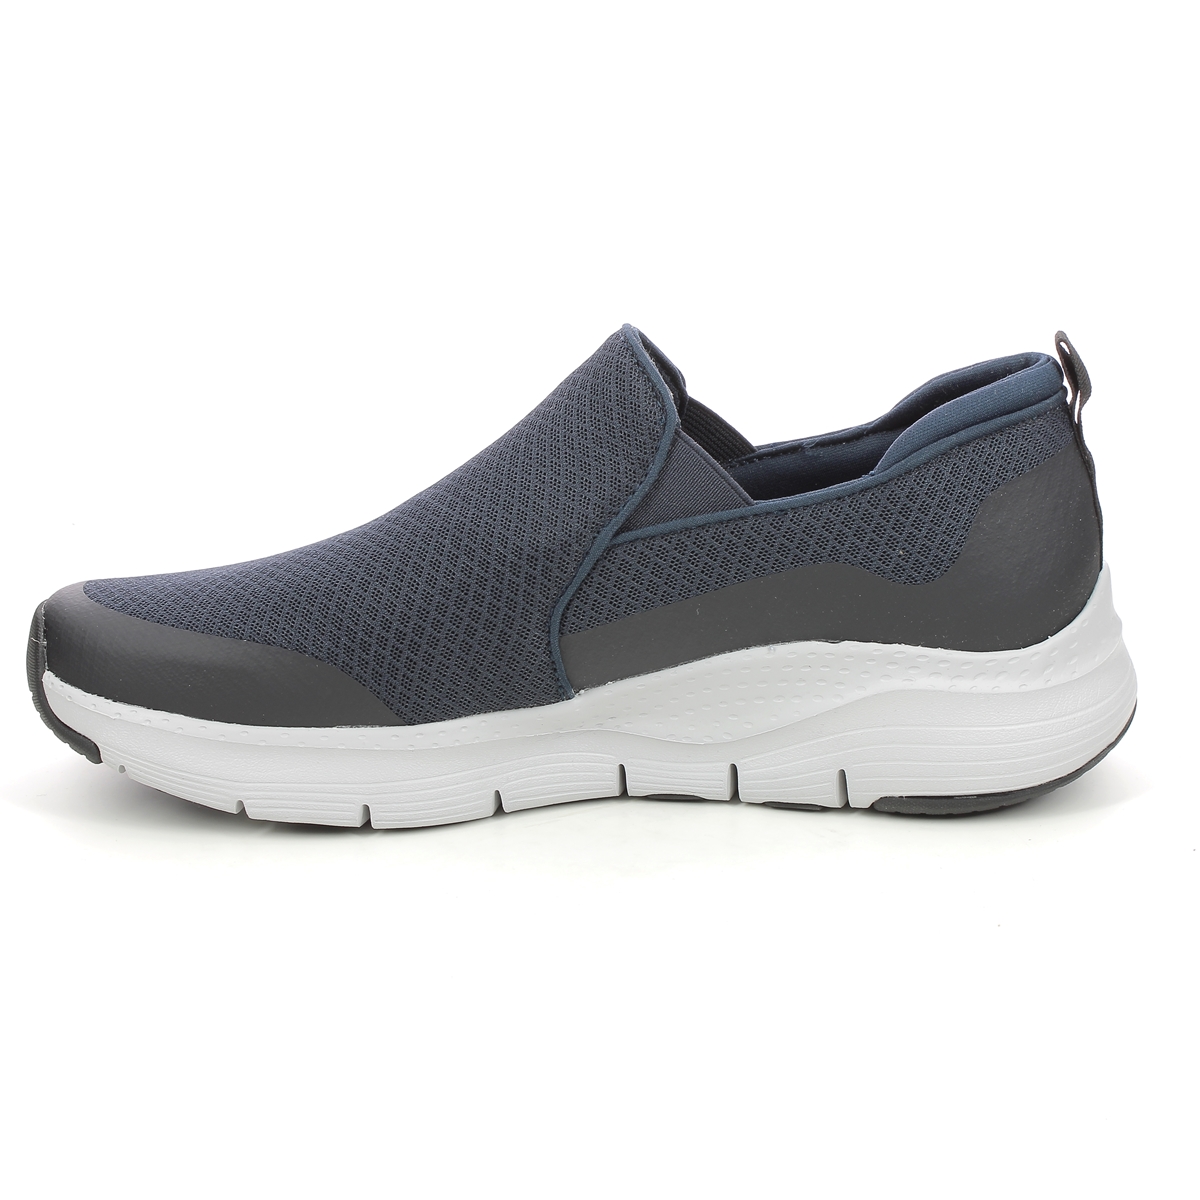 Skechers Arch Fit Slip 232043 NVY Navy trainers